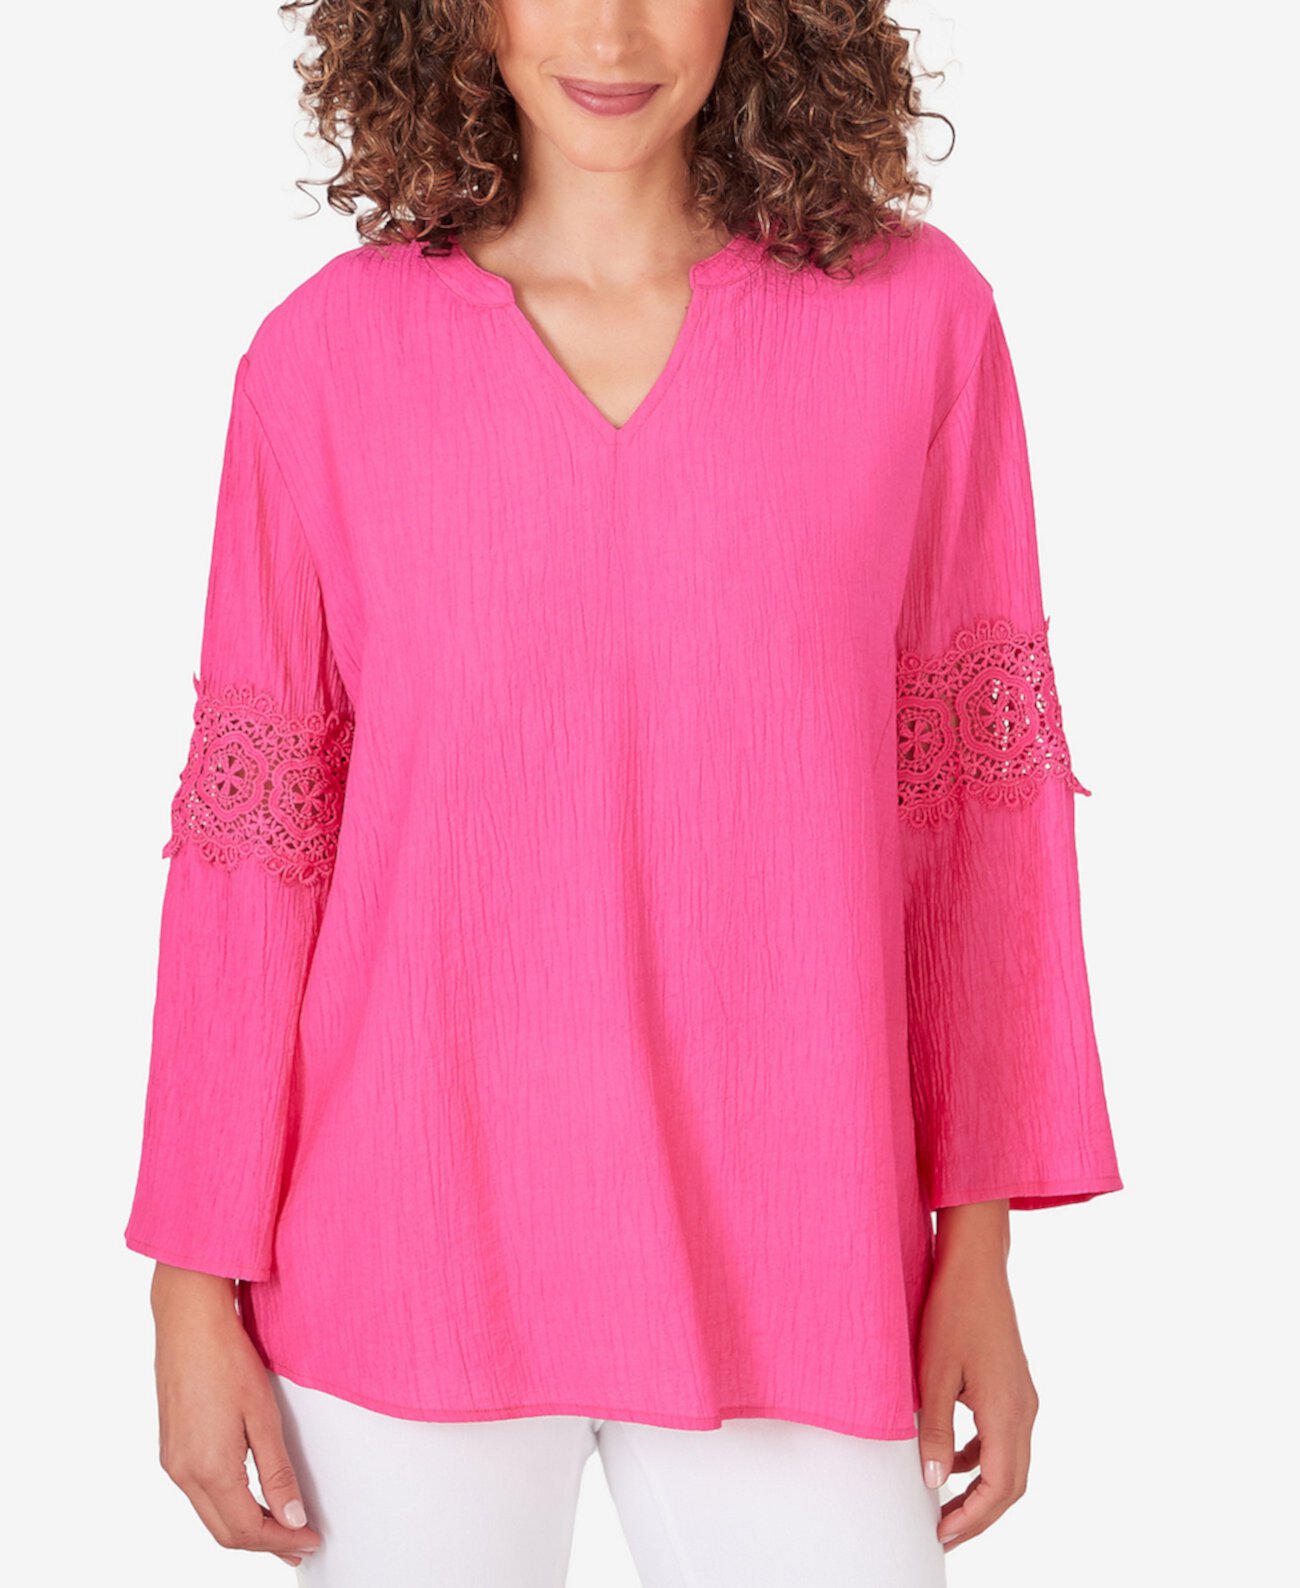 Petite Lace-Embellished Top Ruby Rd.